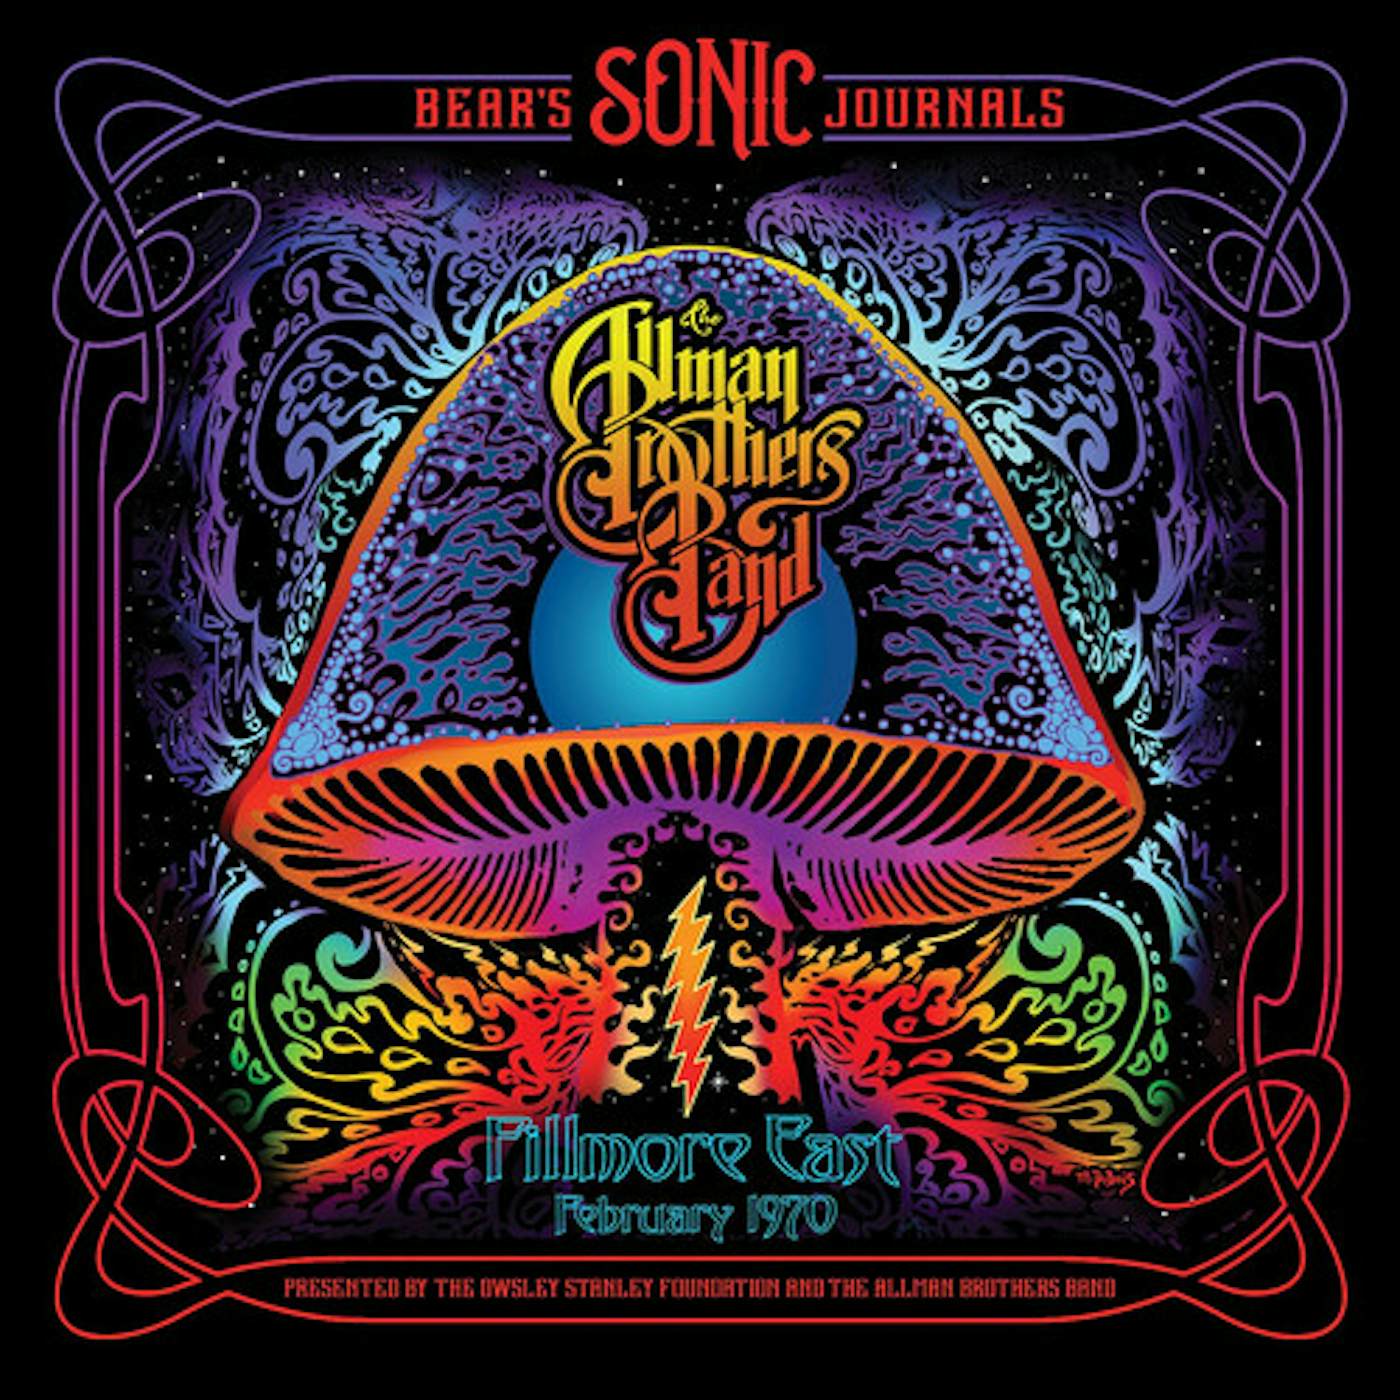 Allman Brothers Band Bear's Sonic Journals: Fillmore East February 1970 Vinyl Record